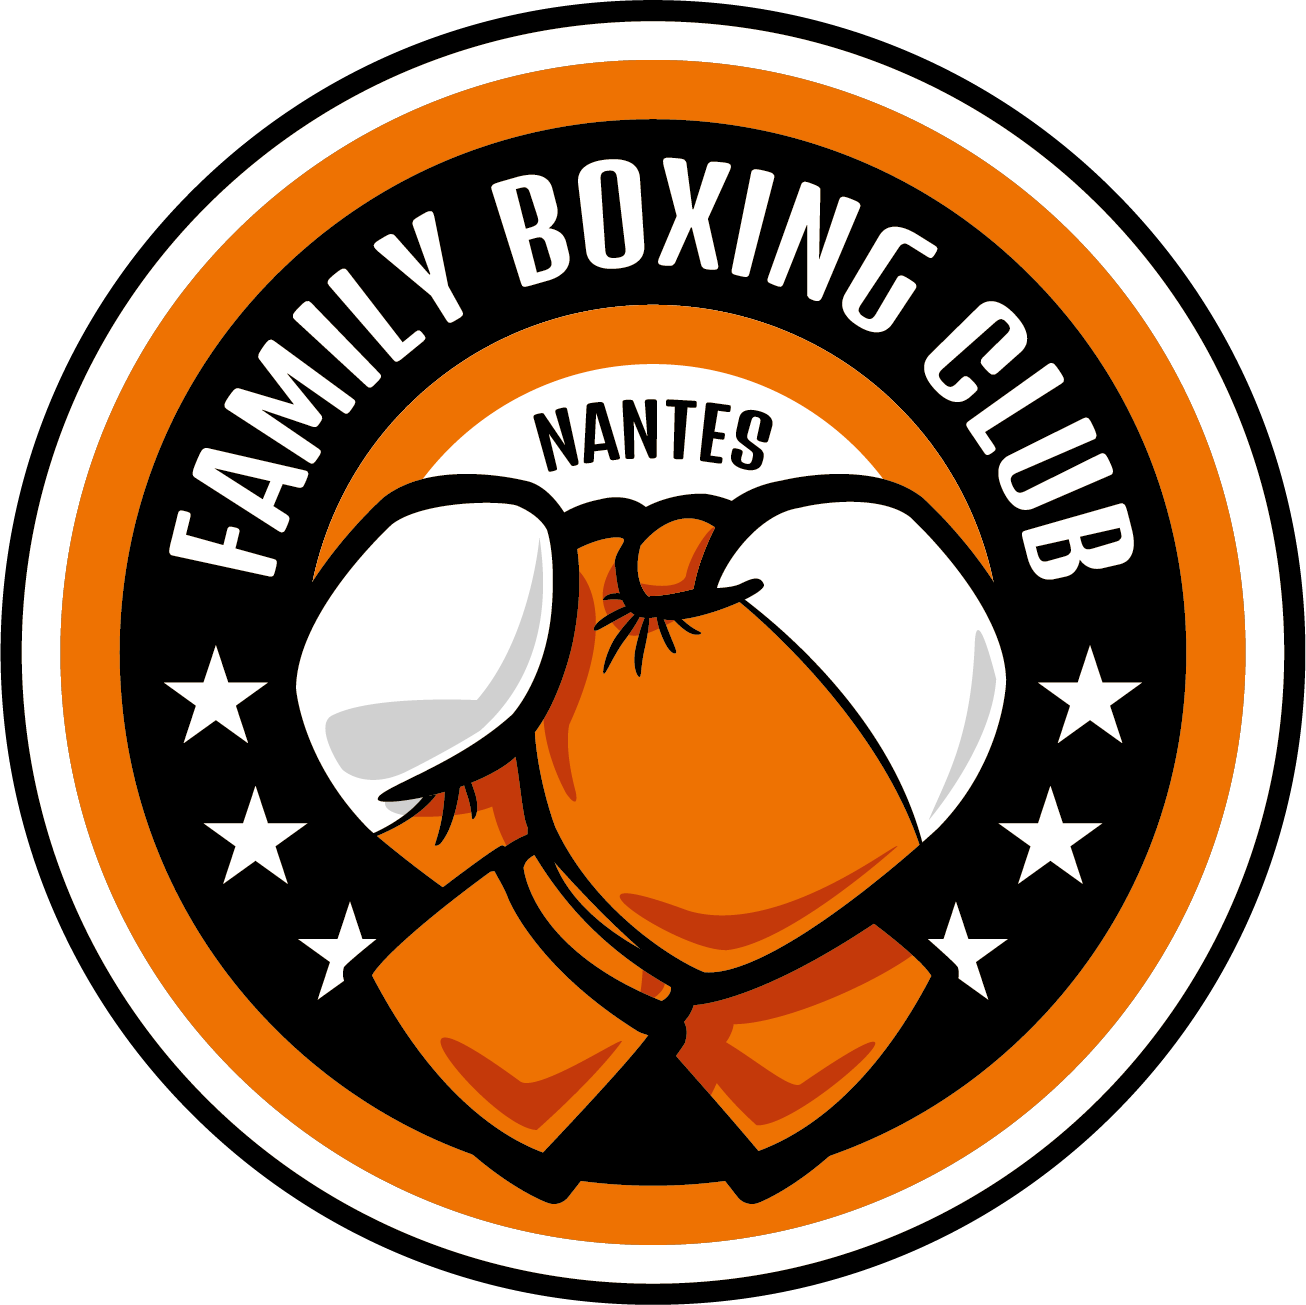 Family Boxing Club - Full Contact